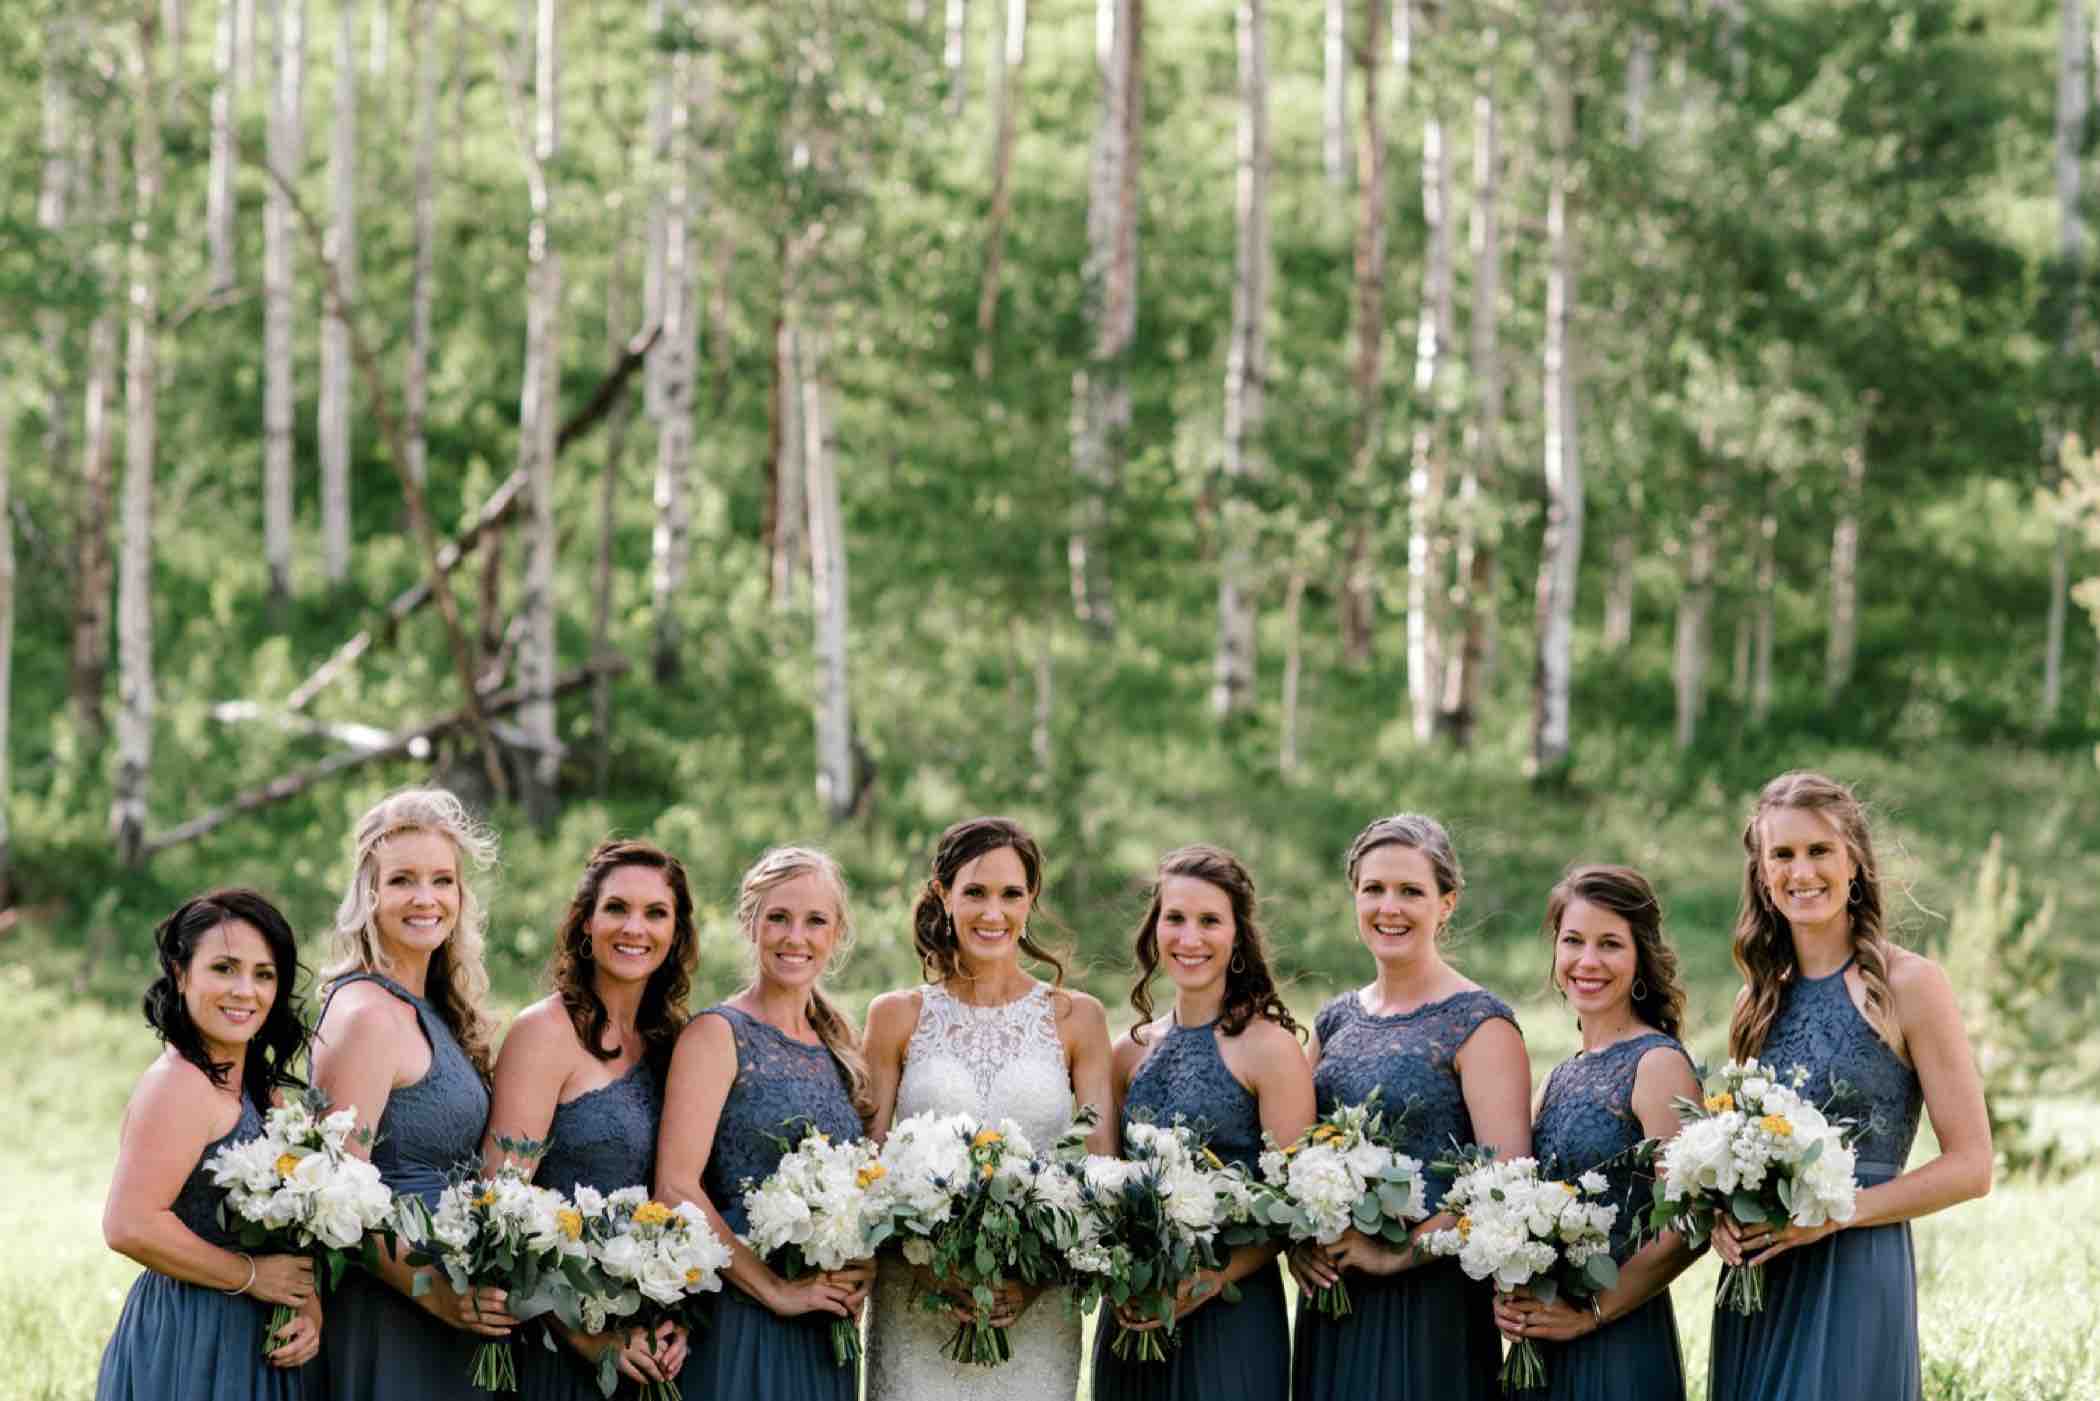 Bride and bridesmaid photos outside Piney River Ranch in Vail in the Colorado Rocky Mountains. Photo by Ali and Garrett, Romantic, Adventurous, Nostalgic Wedding Photographers.